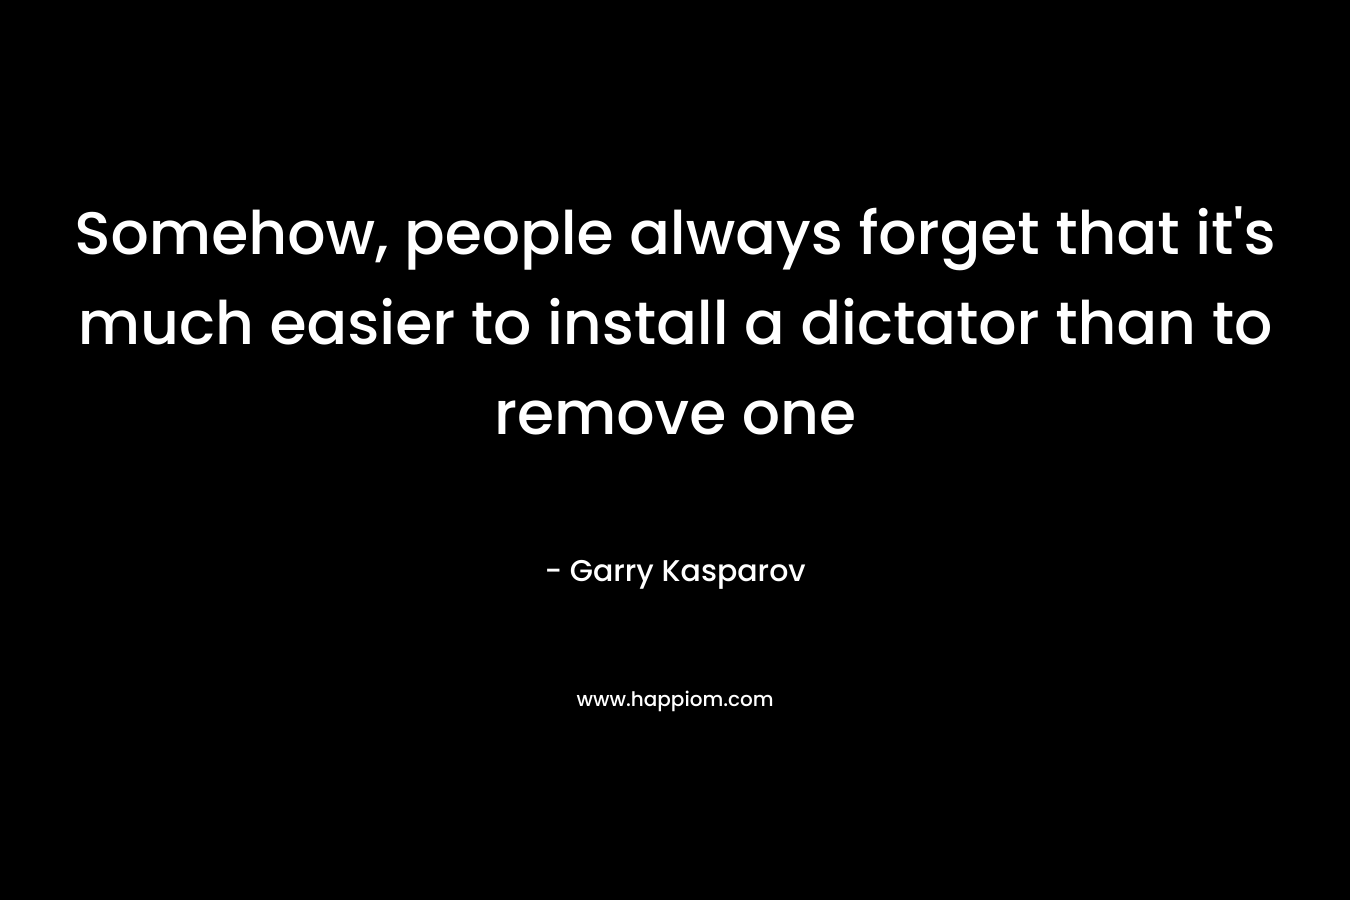 Somehow, people always forget that it's much easier to install a dictator than to remove one